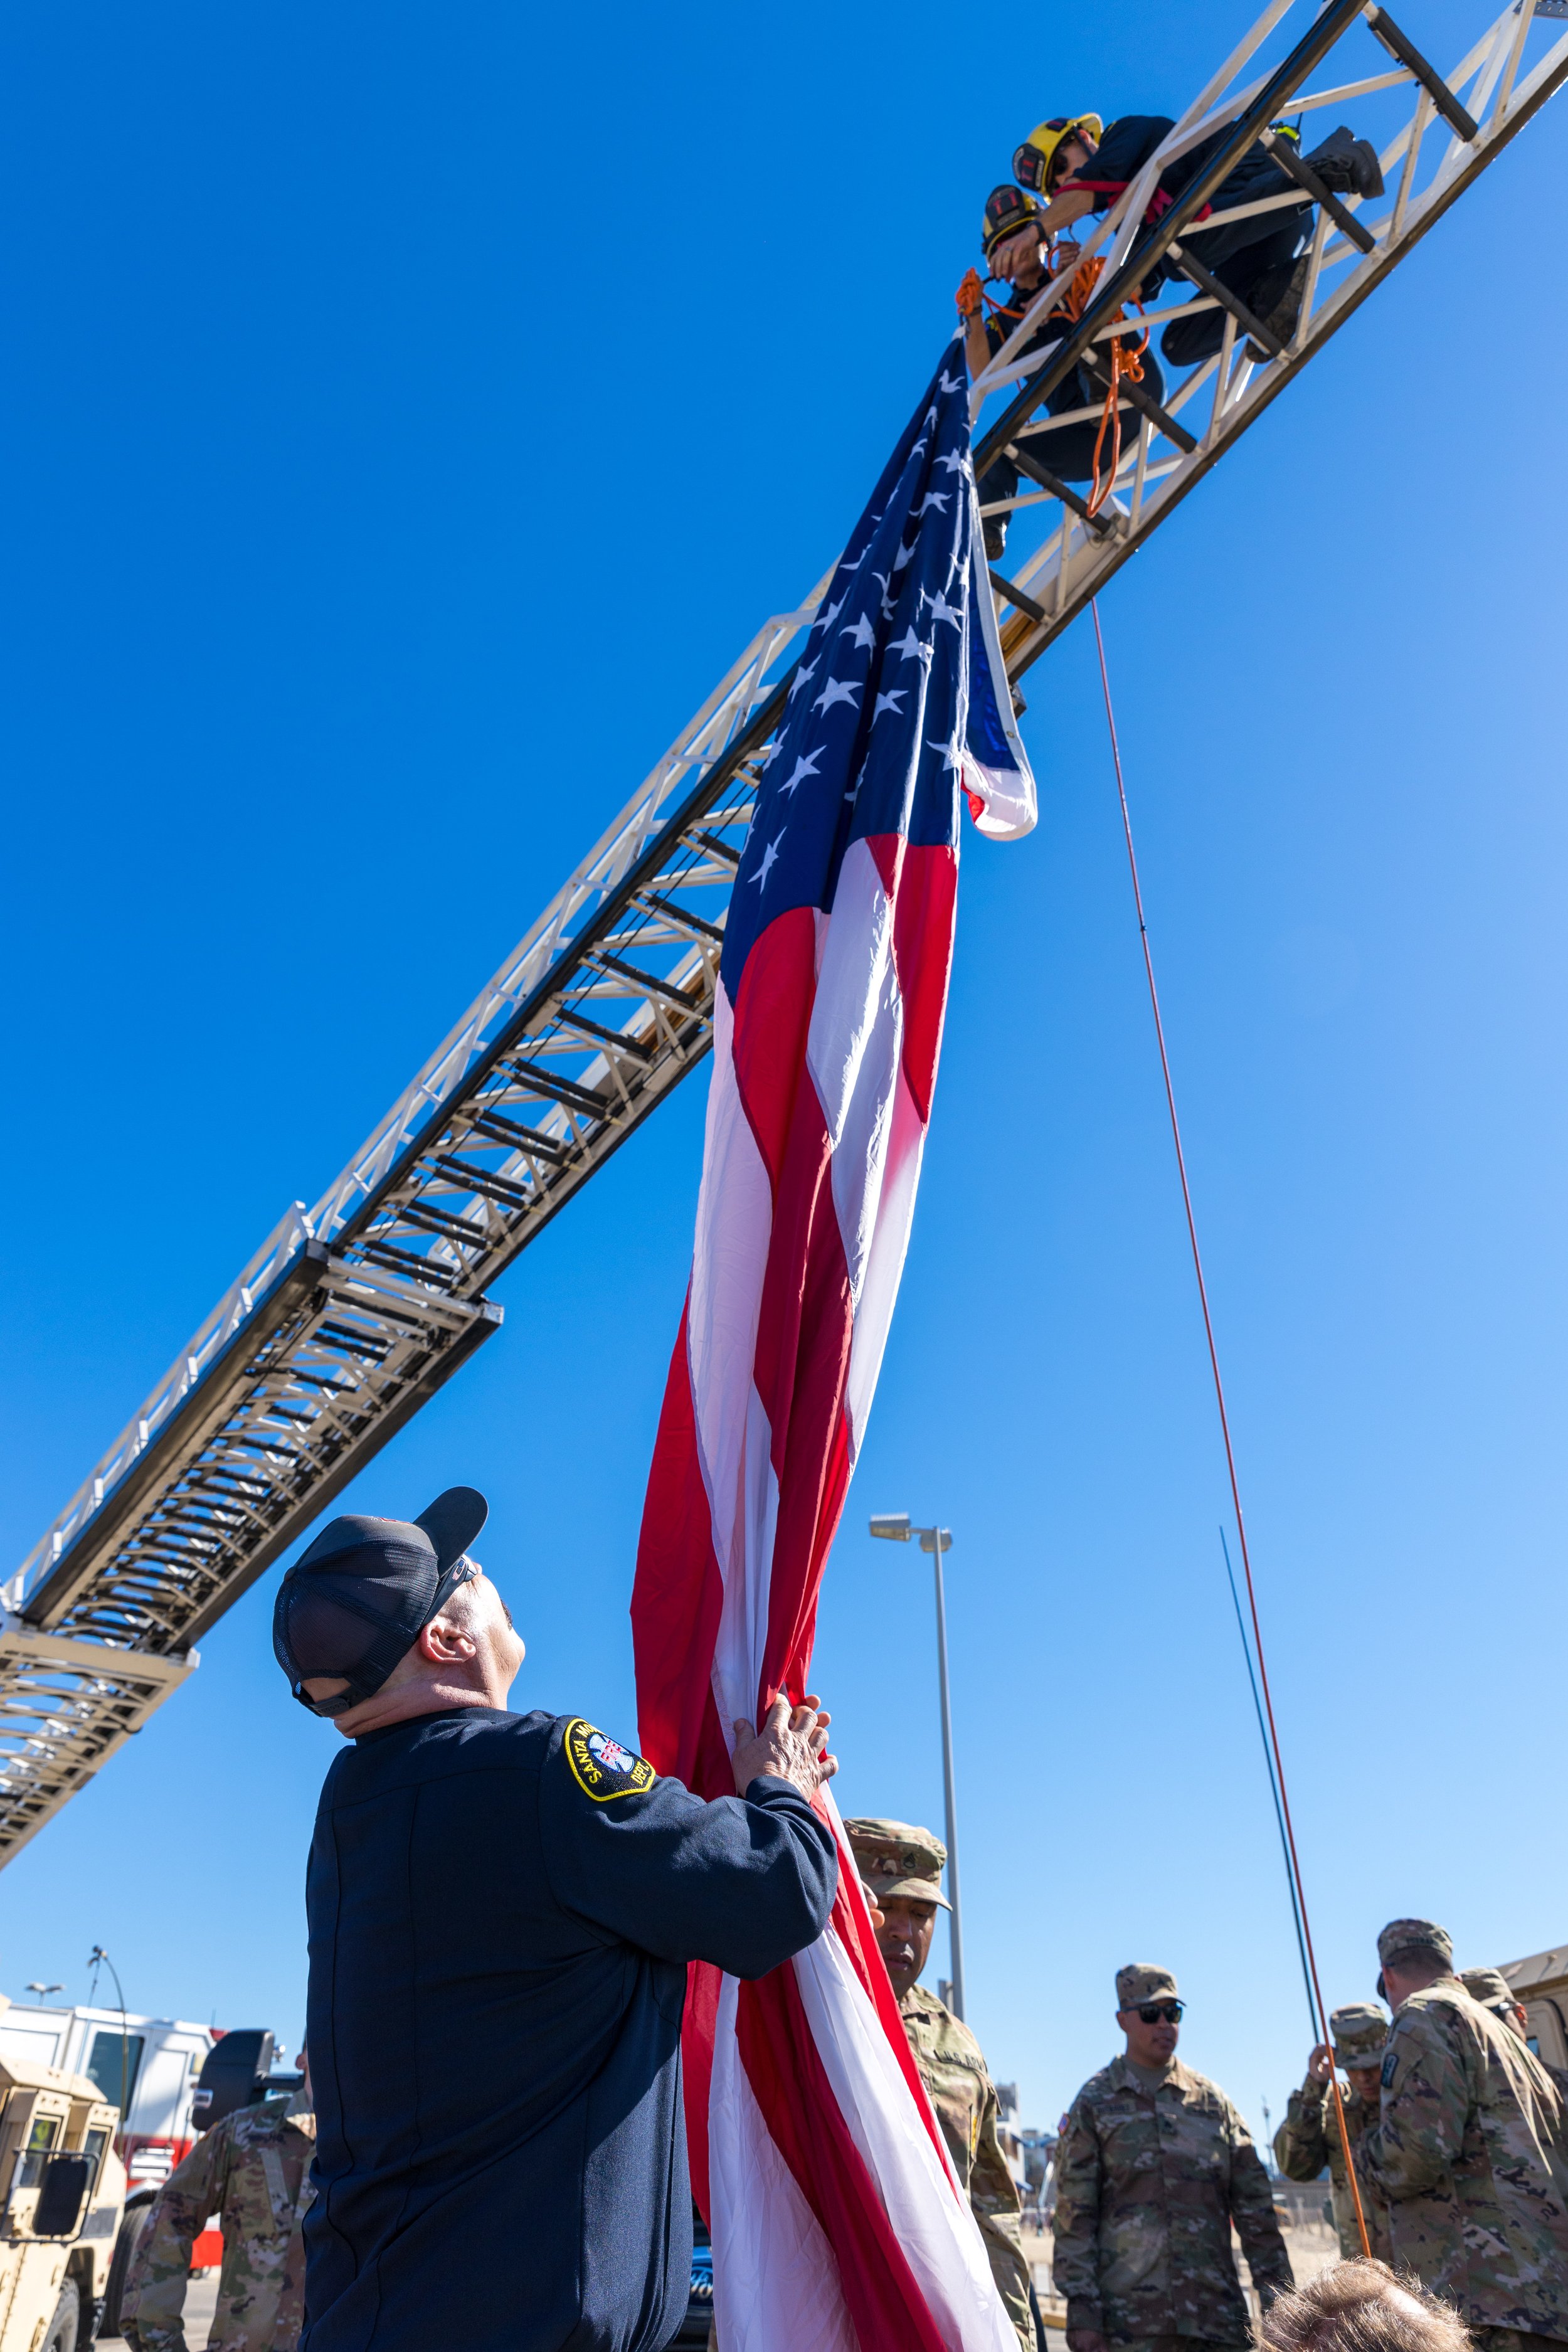  Members of the Santa Monica Fire Department remove a flag from its place hanging from a ladder after the Veterans Day commemoration near the Santa Monica Pier in Santa Monica, California on November 11, 2021. (Maxim Elramsisy | The Corsair) 